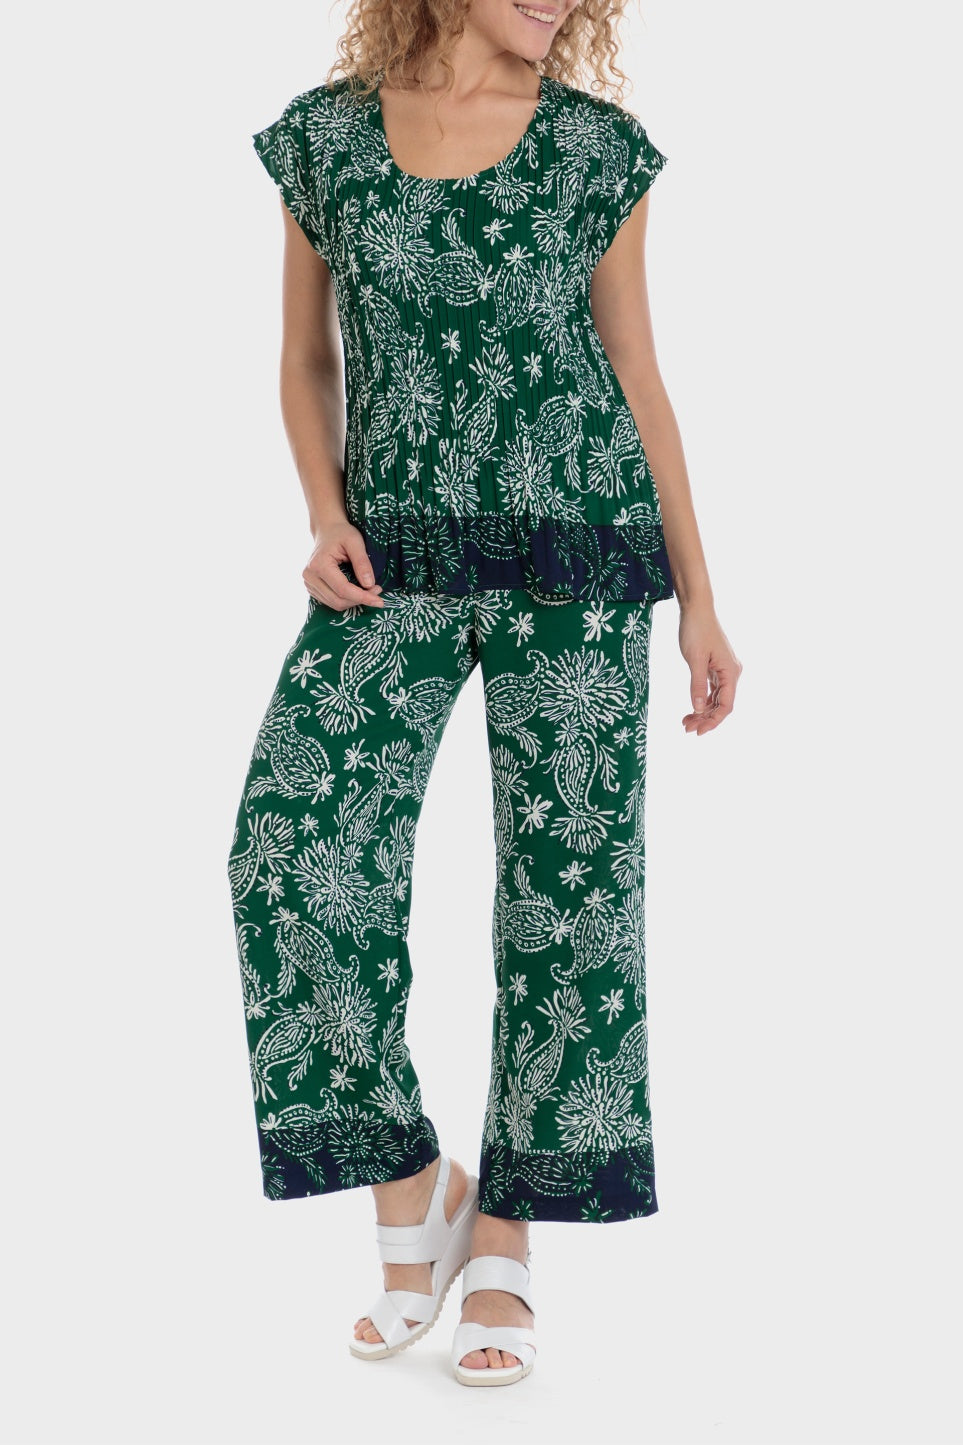 Punt Roma Cashmere Print Trousers - Green 3 Shaws Department Stores